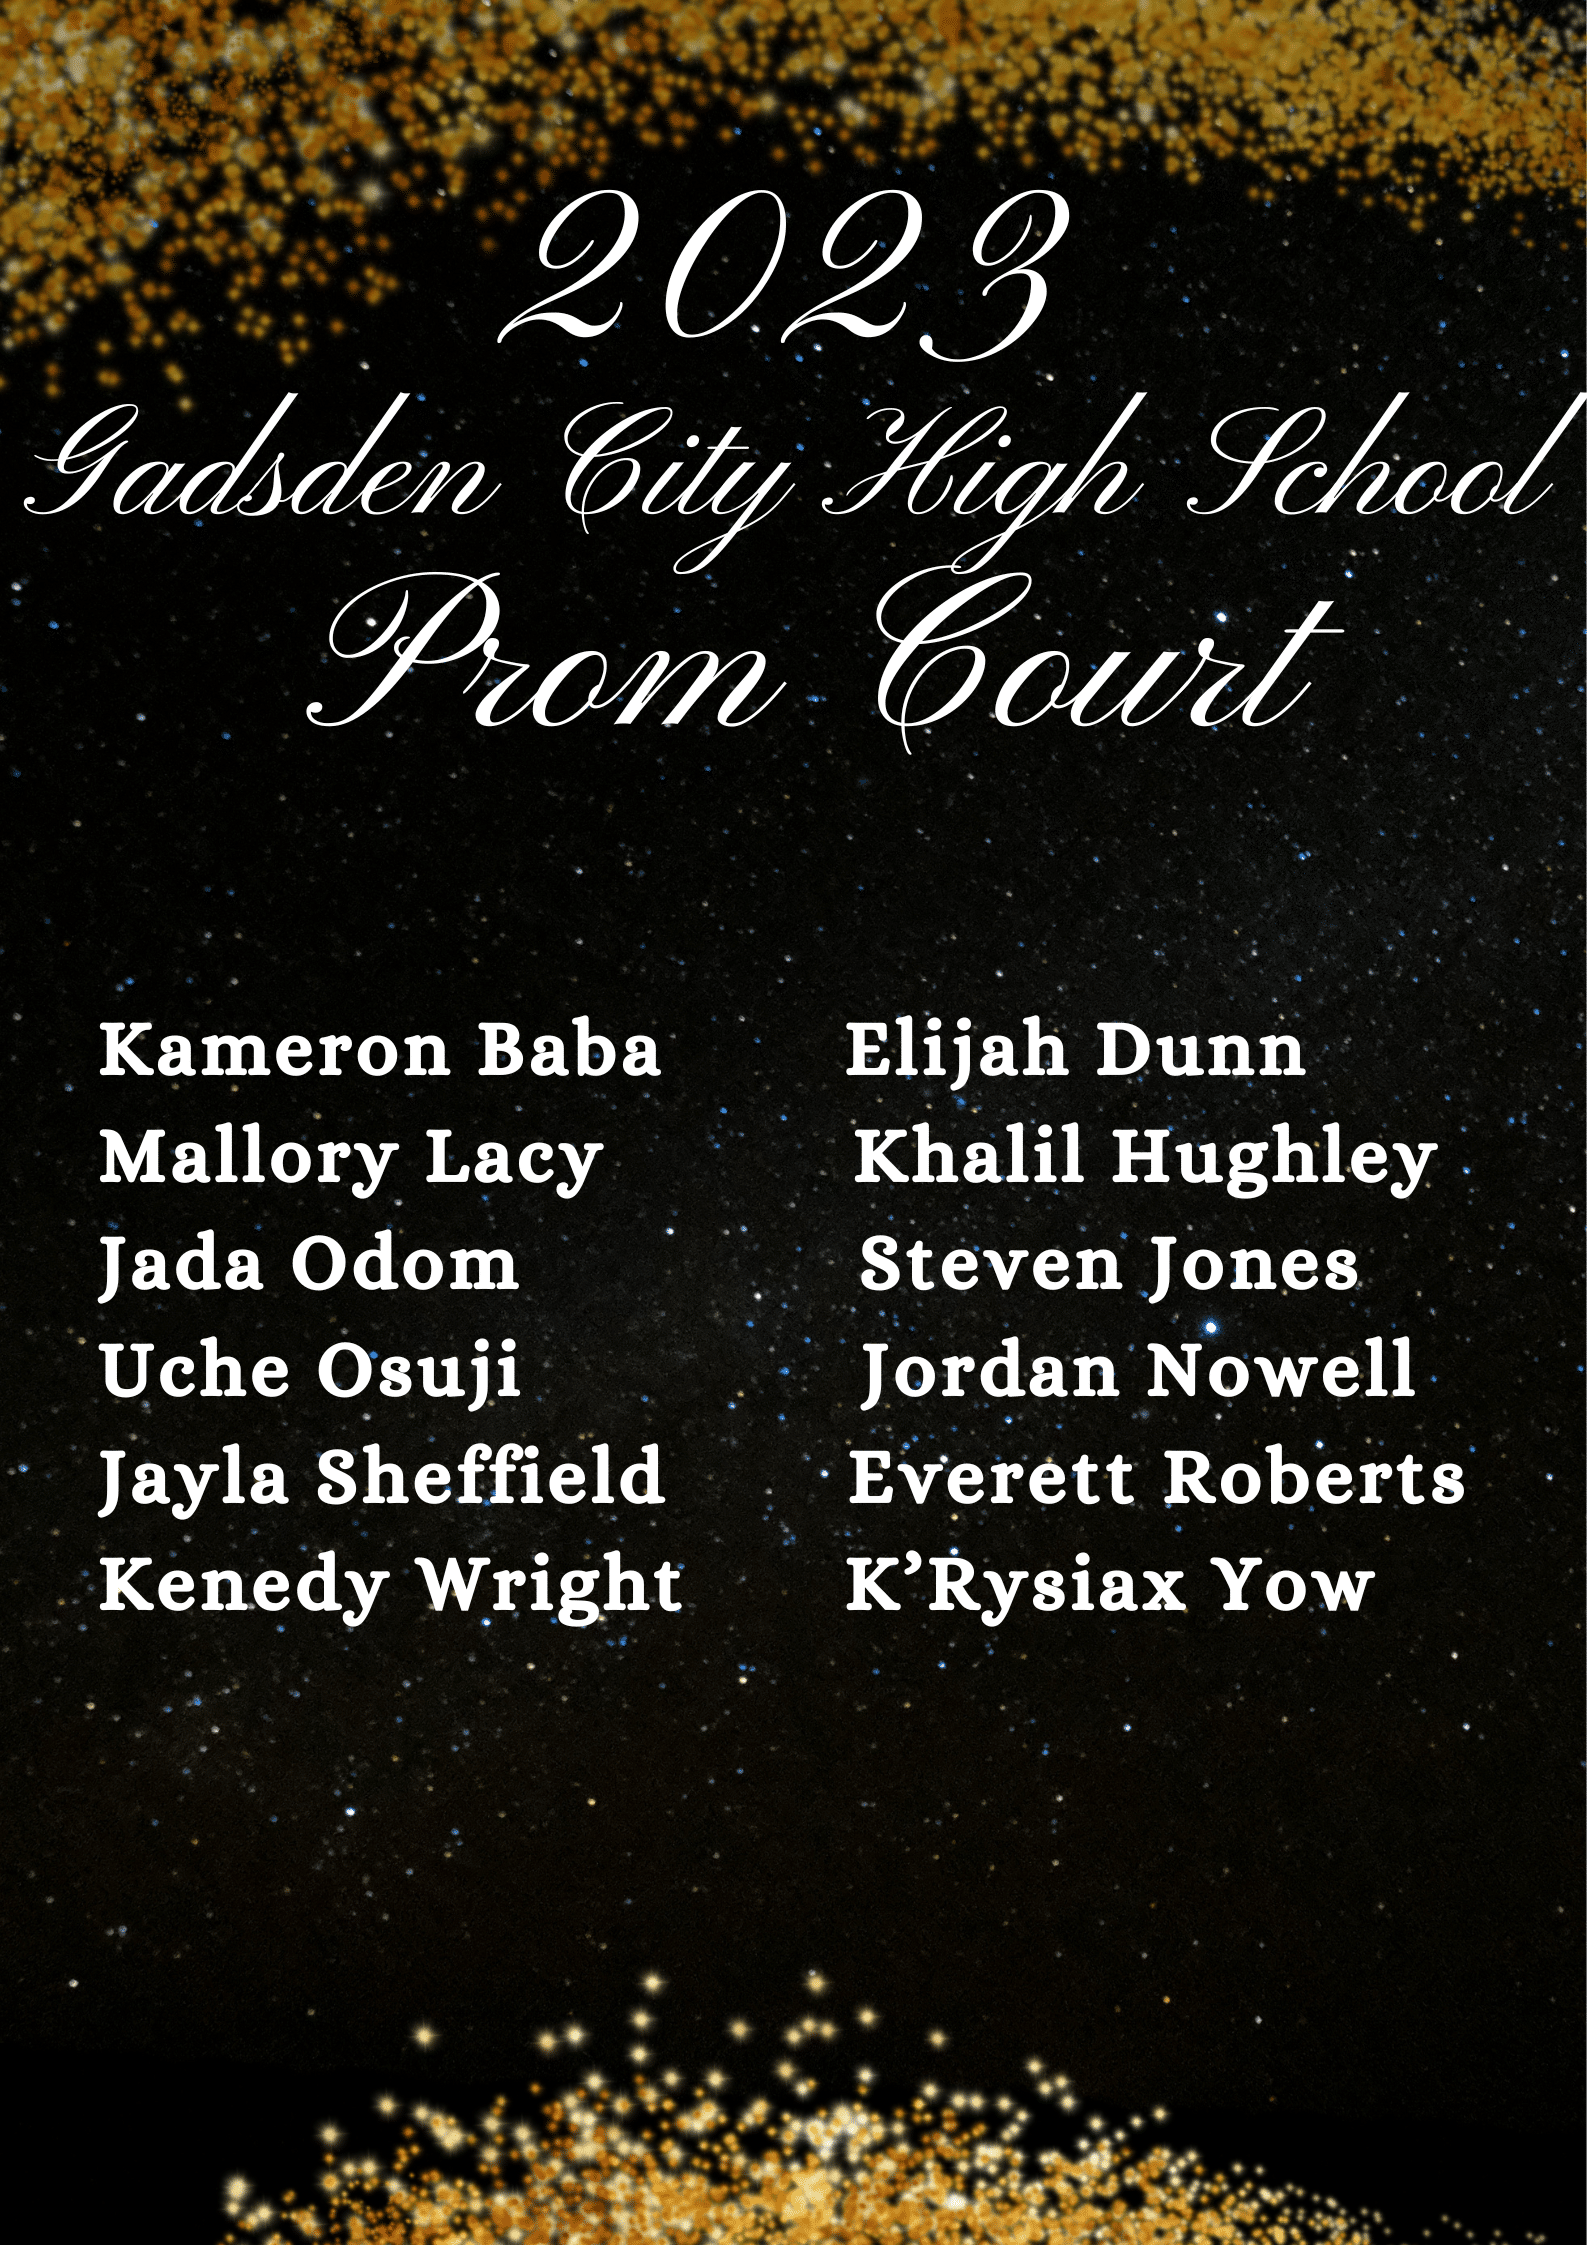 Prom Court and Lead Out